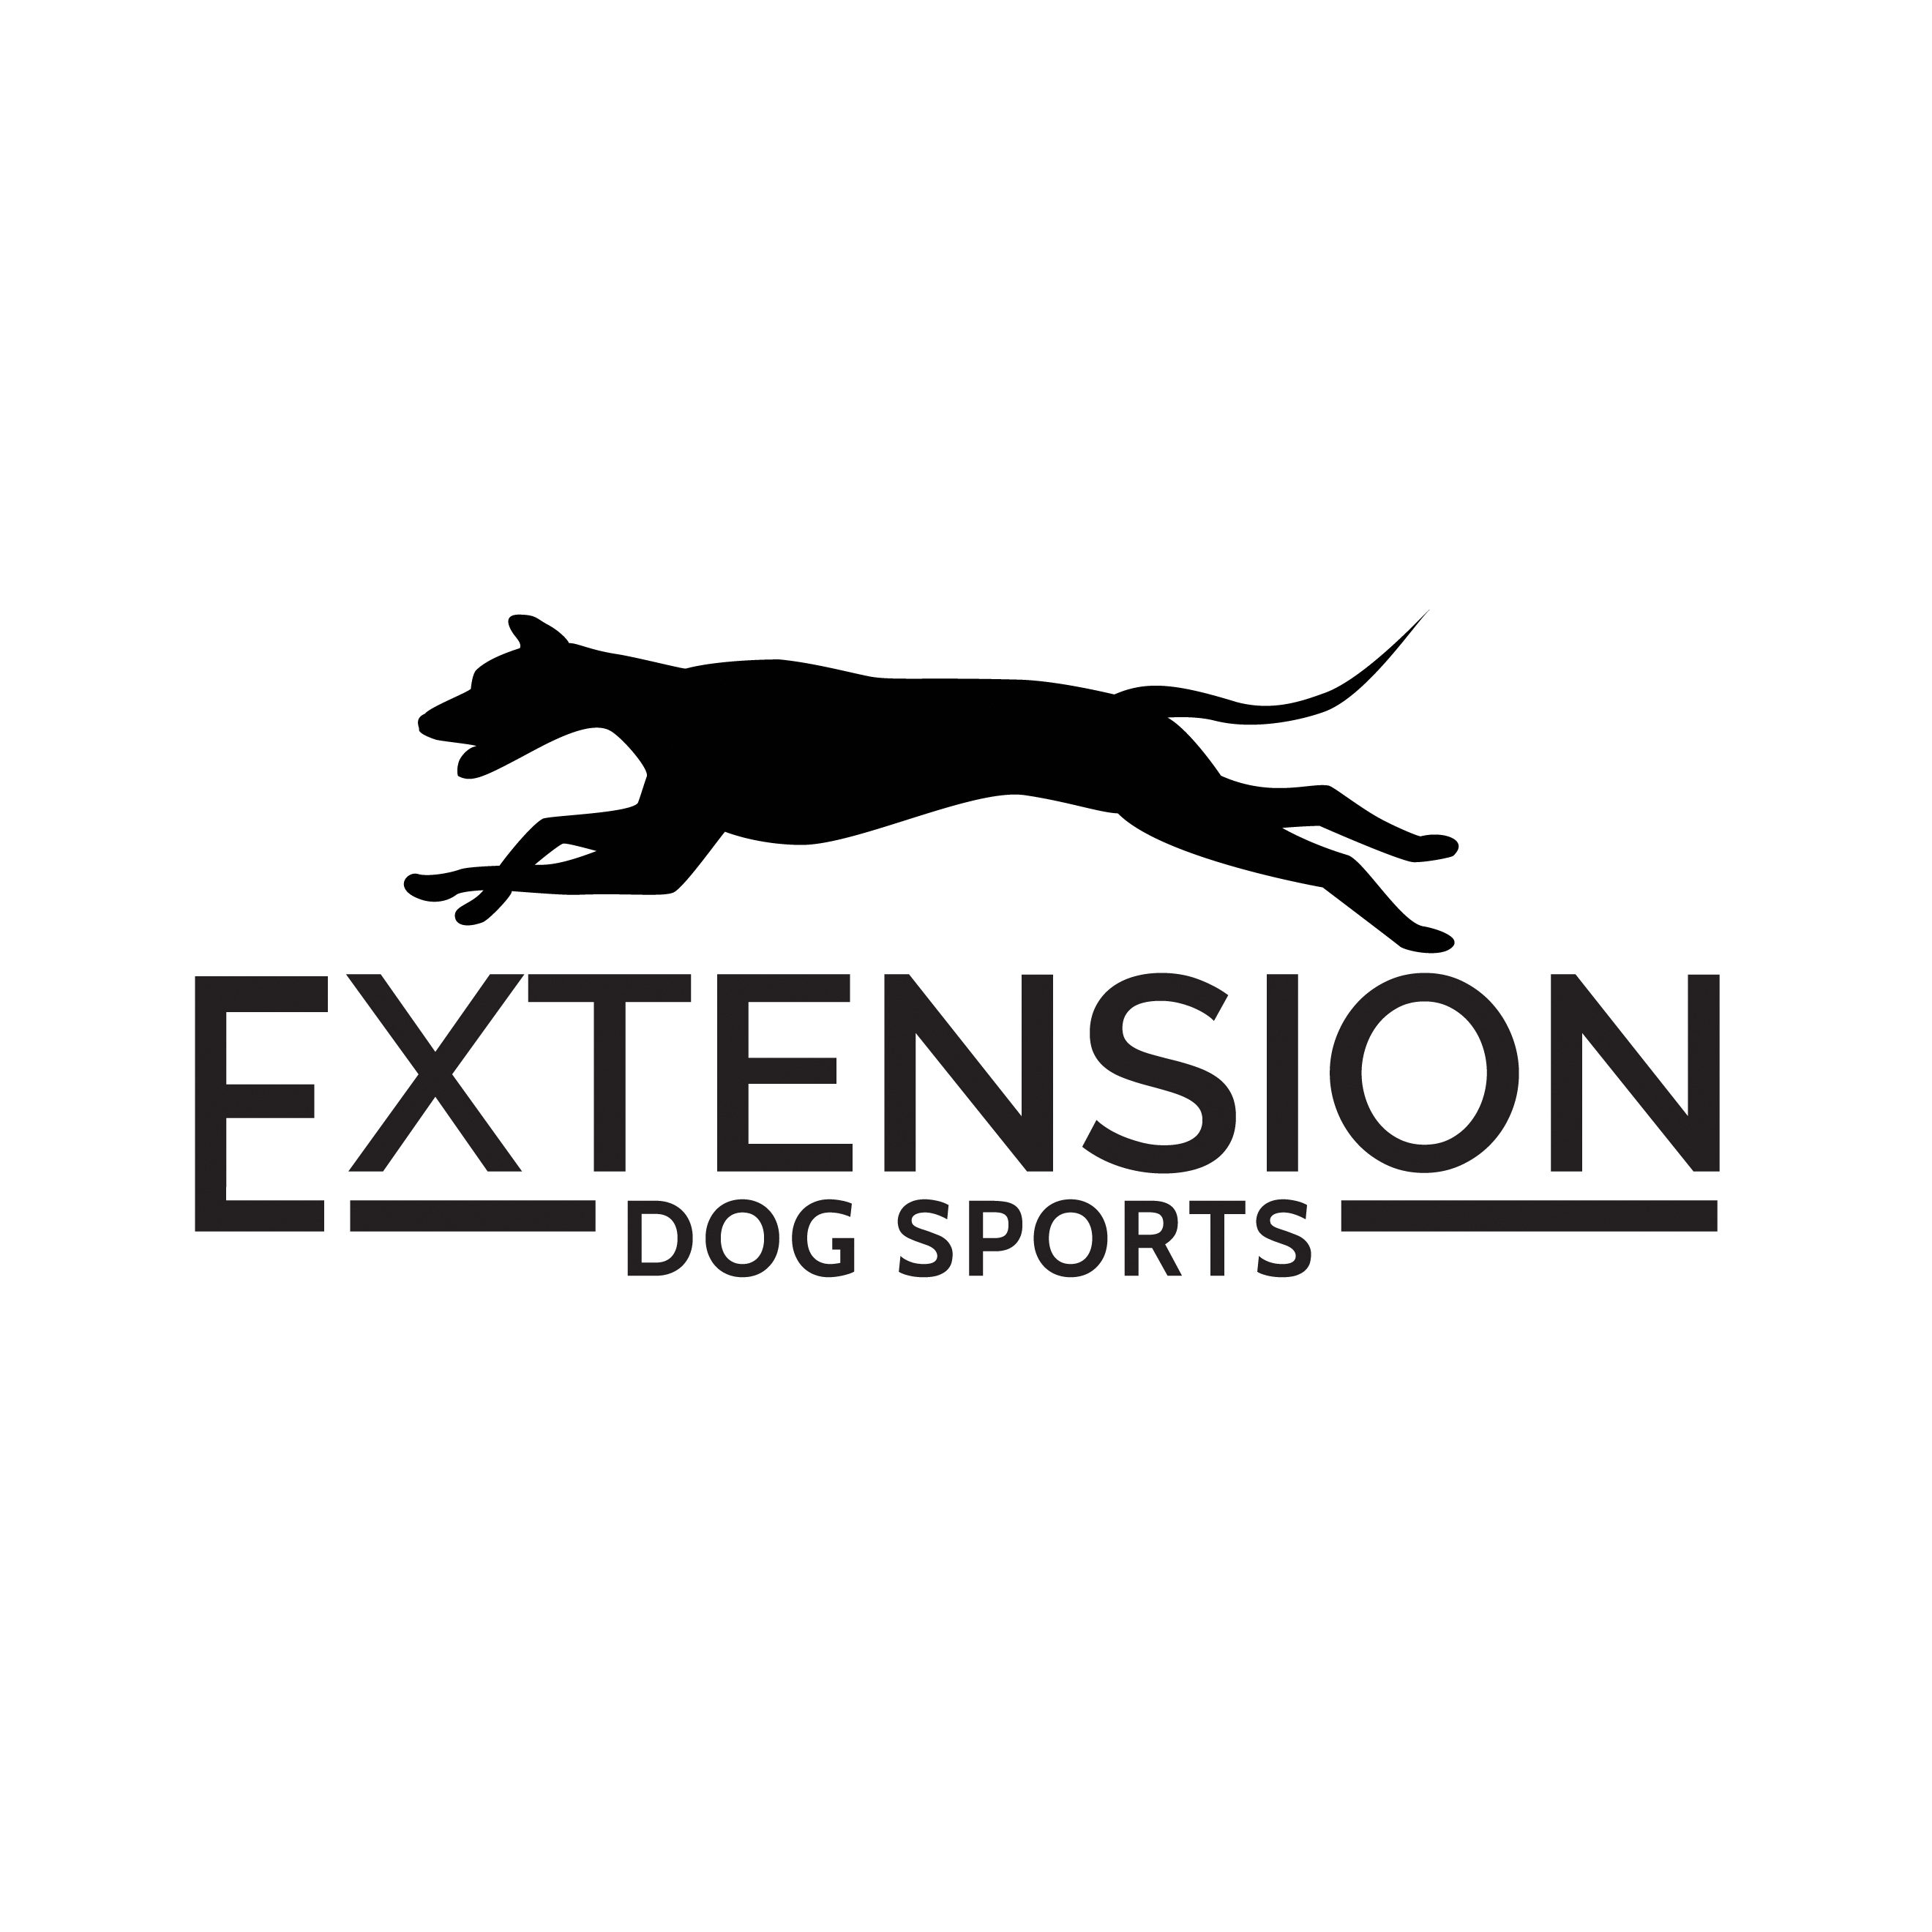 Extension Dog Sports